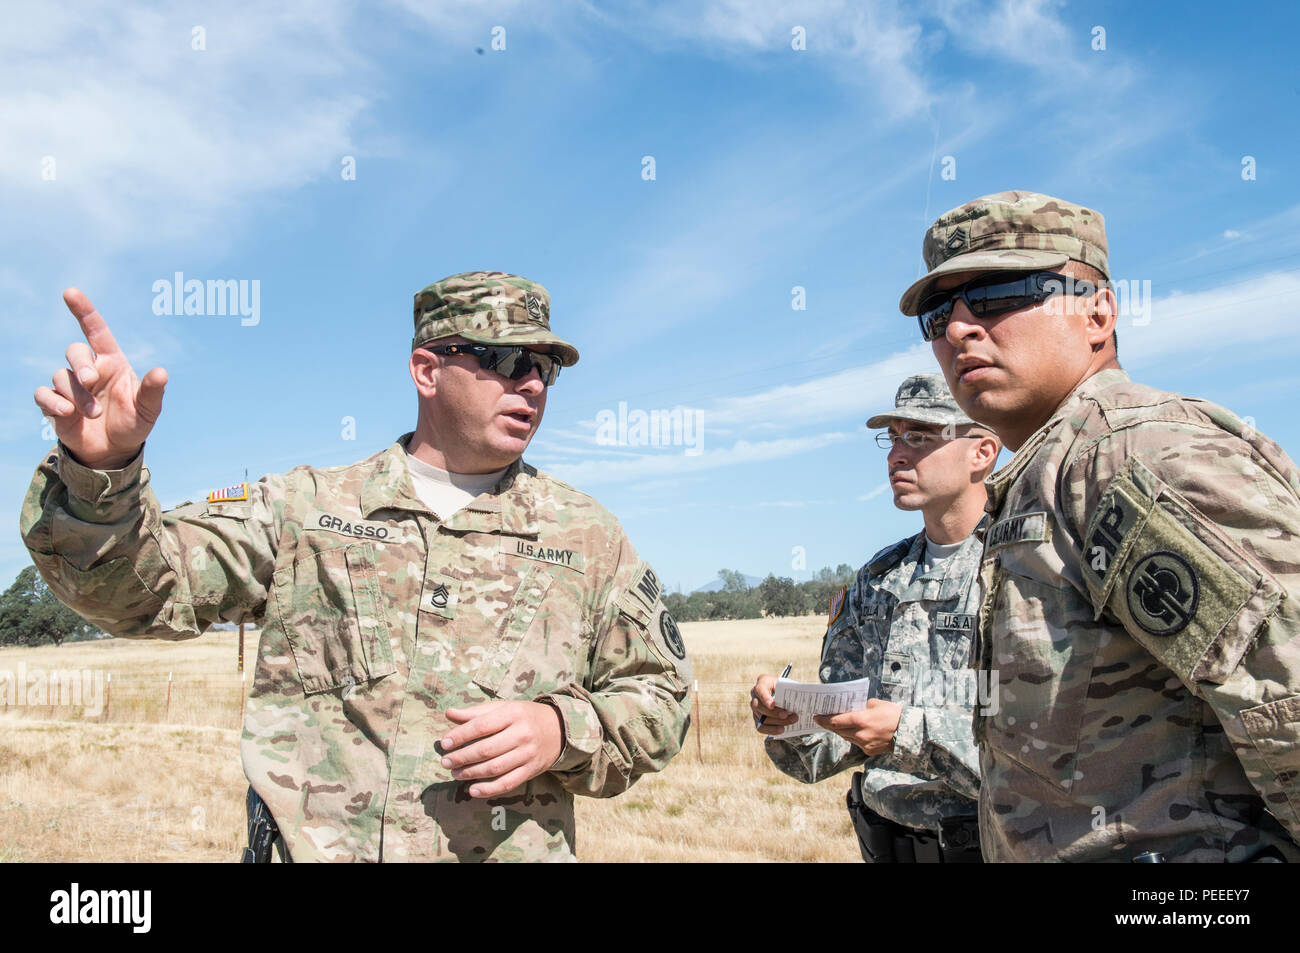 U.S. Army Sgt. 1st Class, Mark Grasso (left), with the 382nd Military Police Detachment, San Diego, gives instructions to military police officers Spc. Juan Padilla (center) from the 382nd Military Police Detachment and Staff Sgt. Daniel Vasquez (right), from the 491st Military Police Company, Riverside, Calif., at Fort Hunter Liggett, Calif., Aug. 3. Grasso, Padilla and Vasquez worked with Fort Hunter Liggett police to maintain law and order, and force protection during their annual training, July 26- Aug. 10. The 382nd supported WAREX 91-15, “Operation Caucasus Restore.” WAREX 91-15 prepares Stock Photo